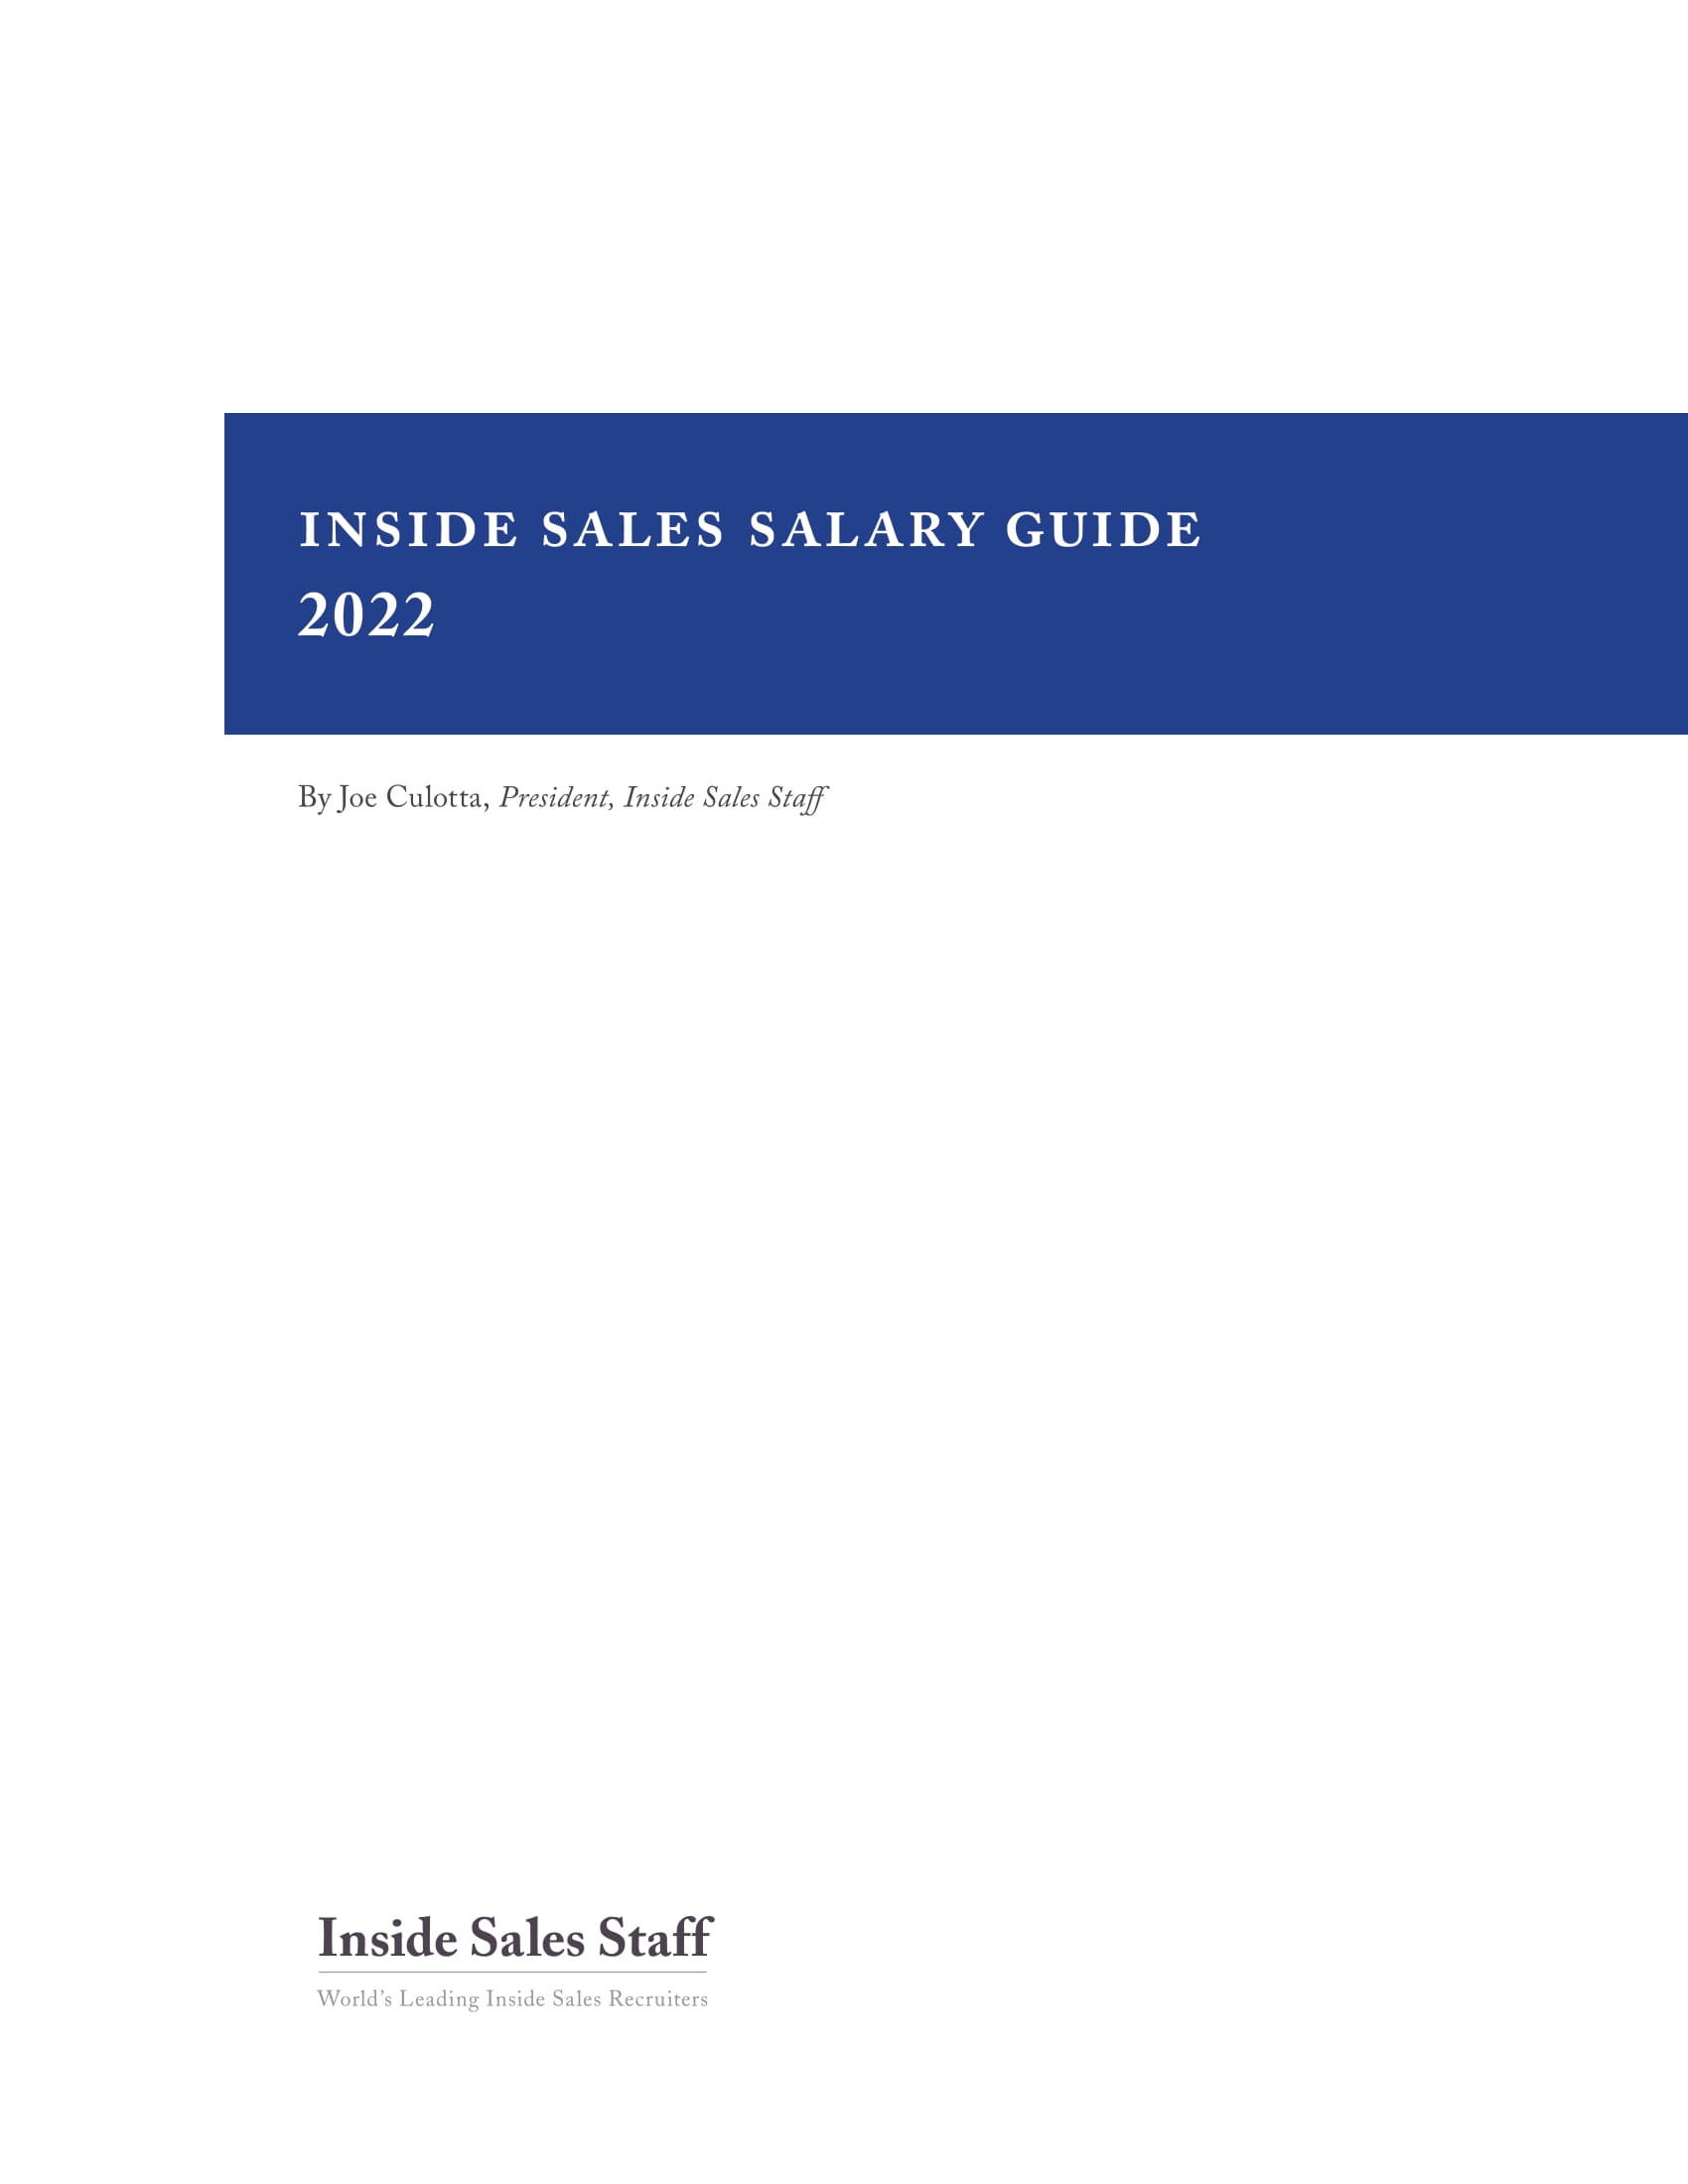 Inside sales salary guide